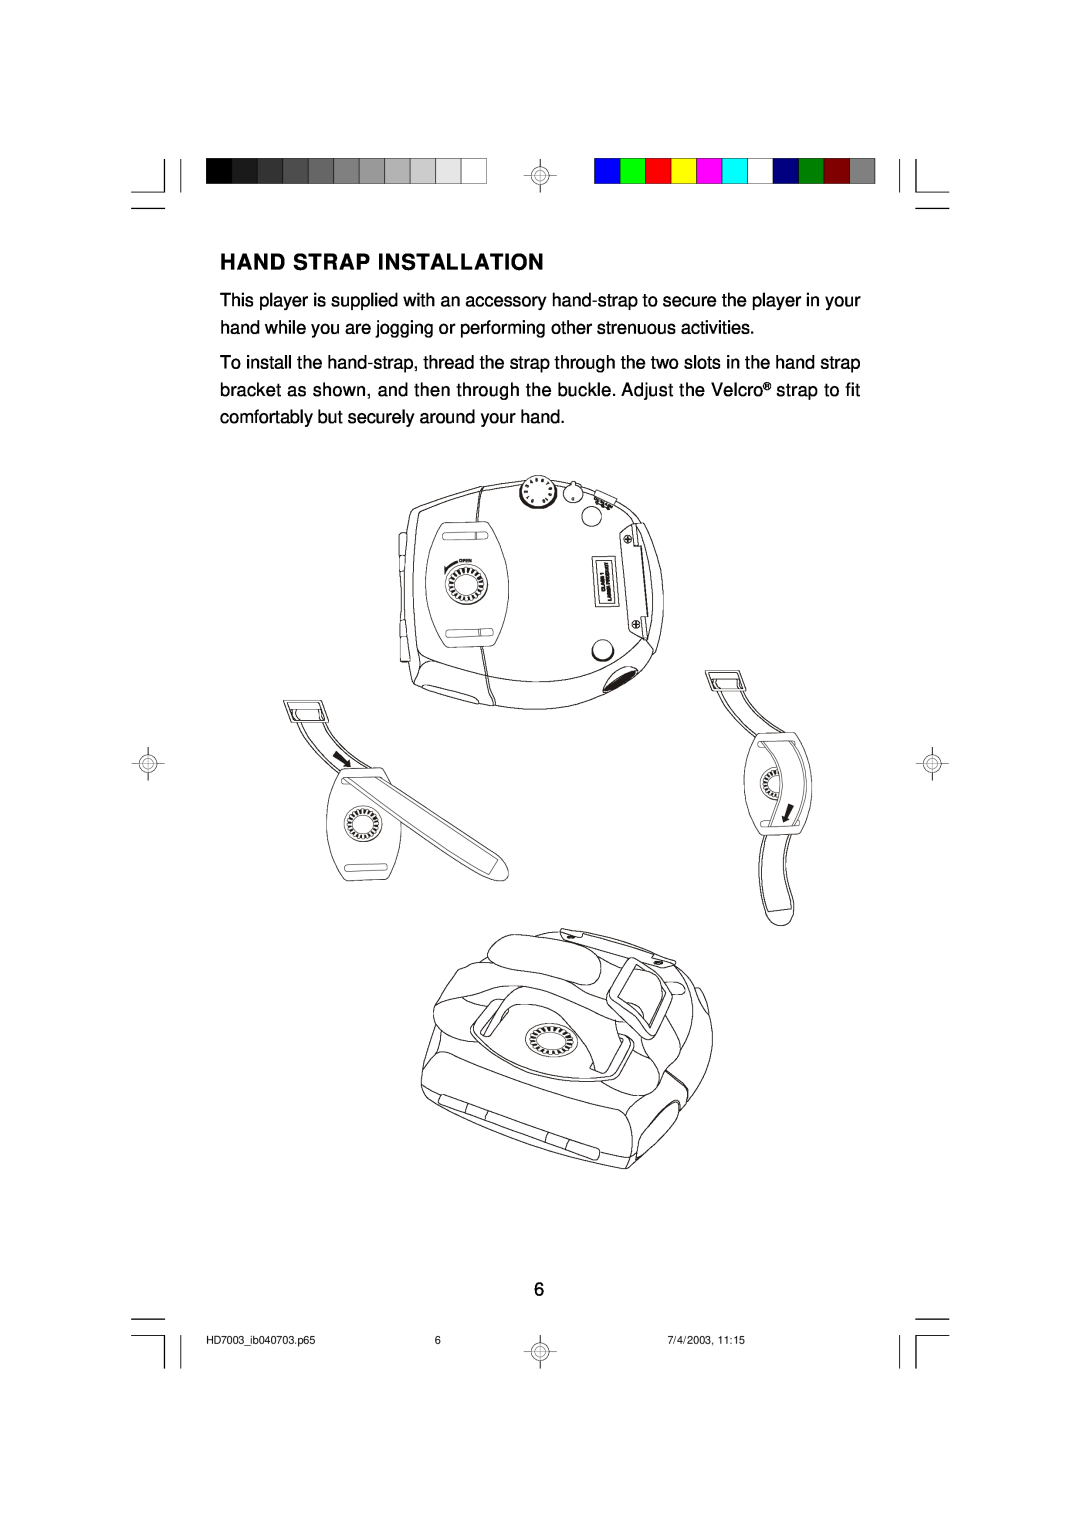 Emerson HD7003 owner manual Hand Strap Installation 